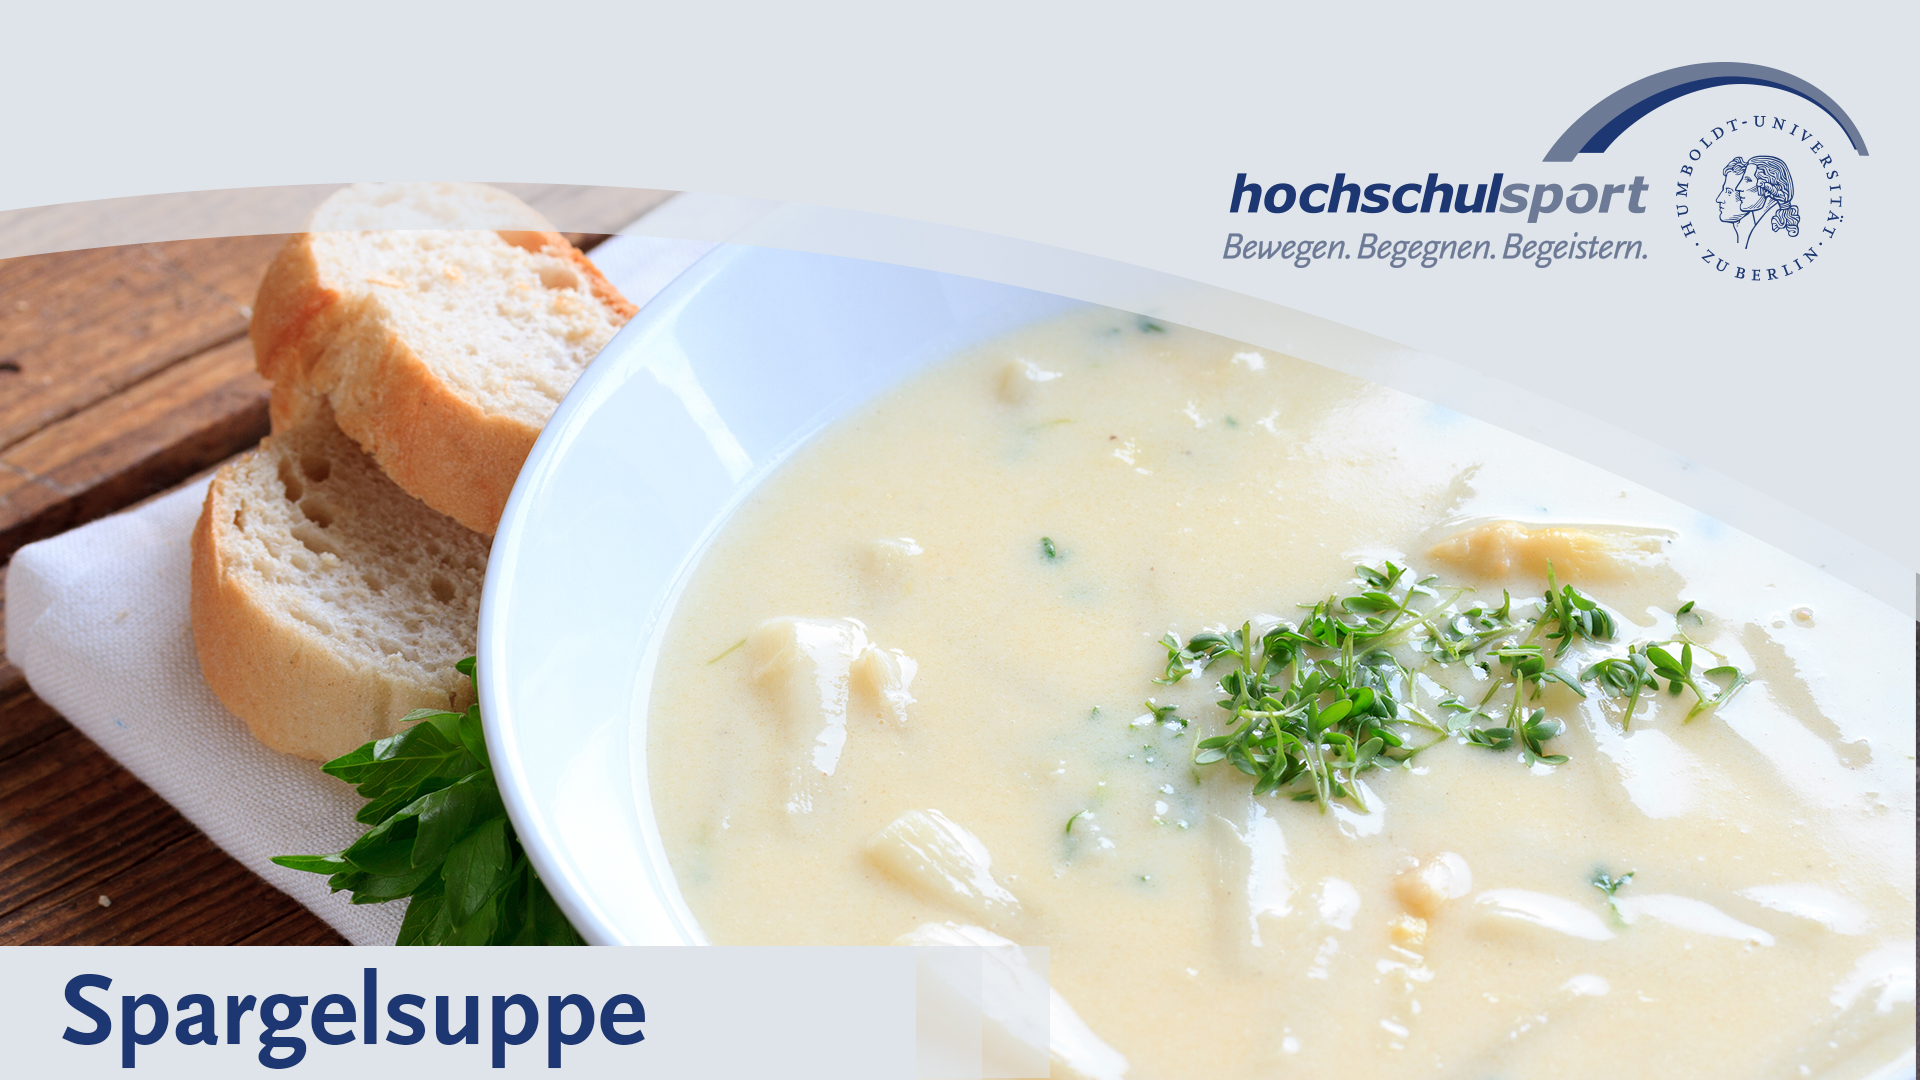 GZH Spargelsuppe